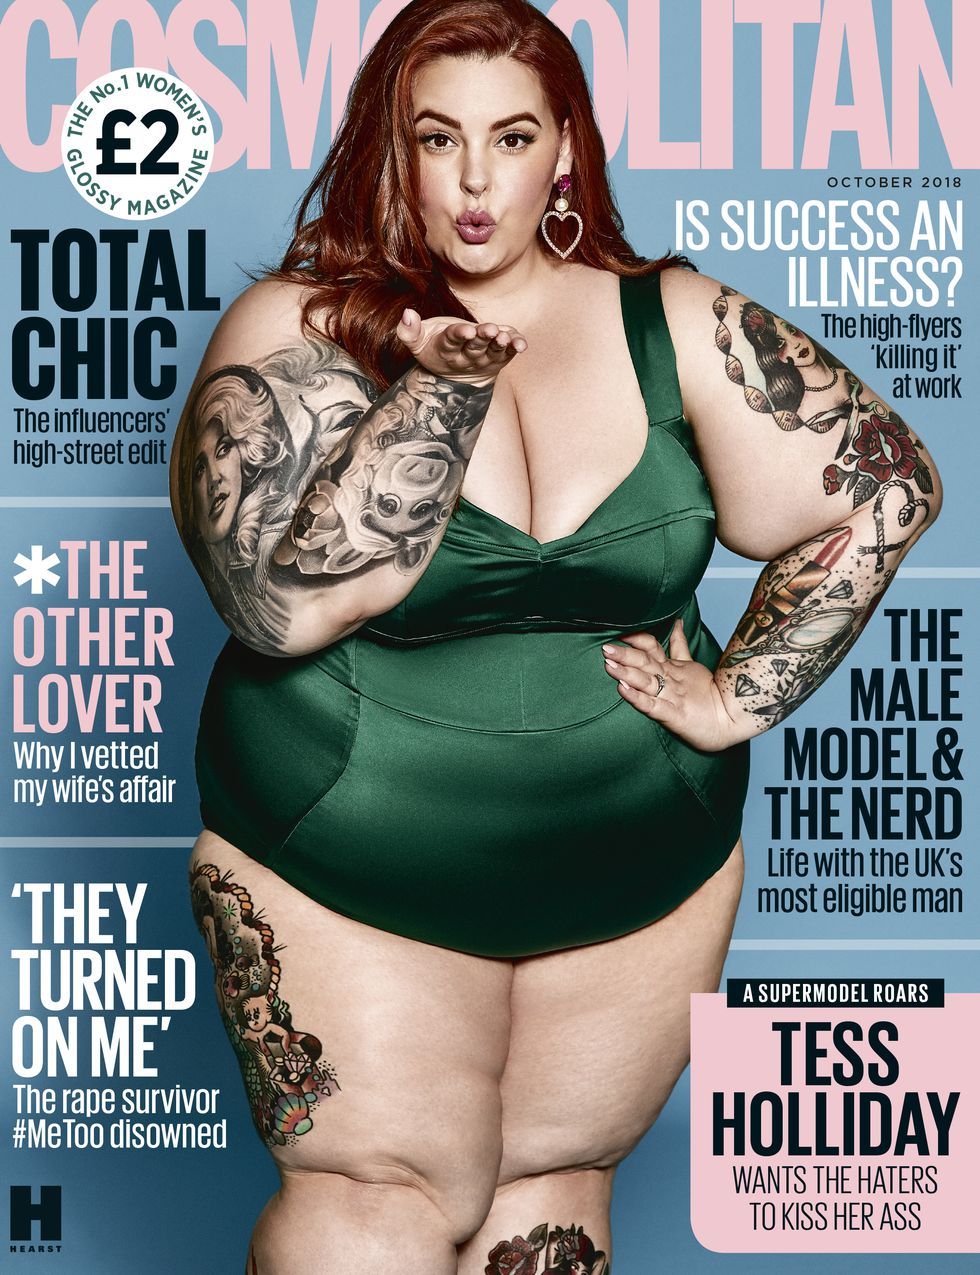 "I wish I could just disappear": Tess Holliday opens up about overcoming crippling mental health